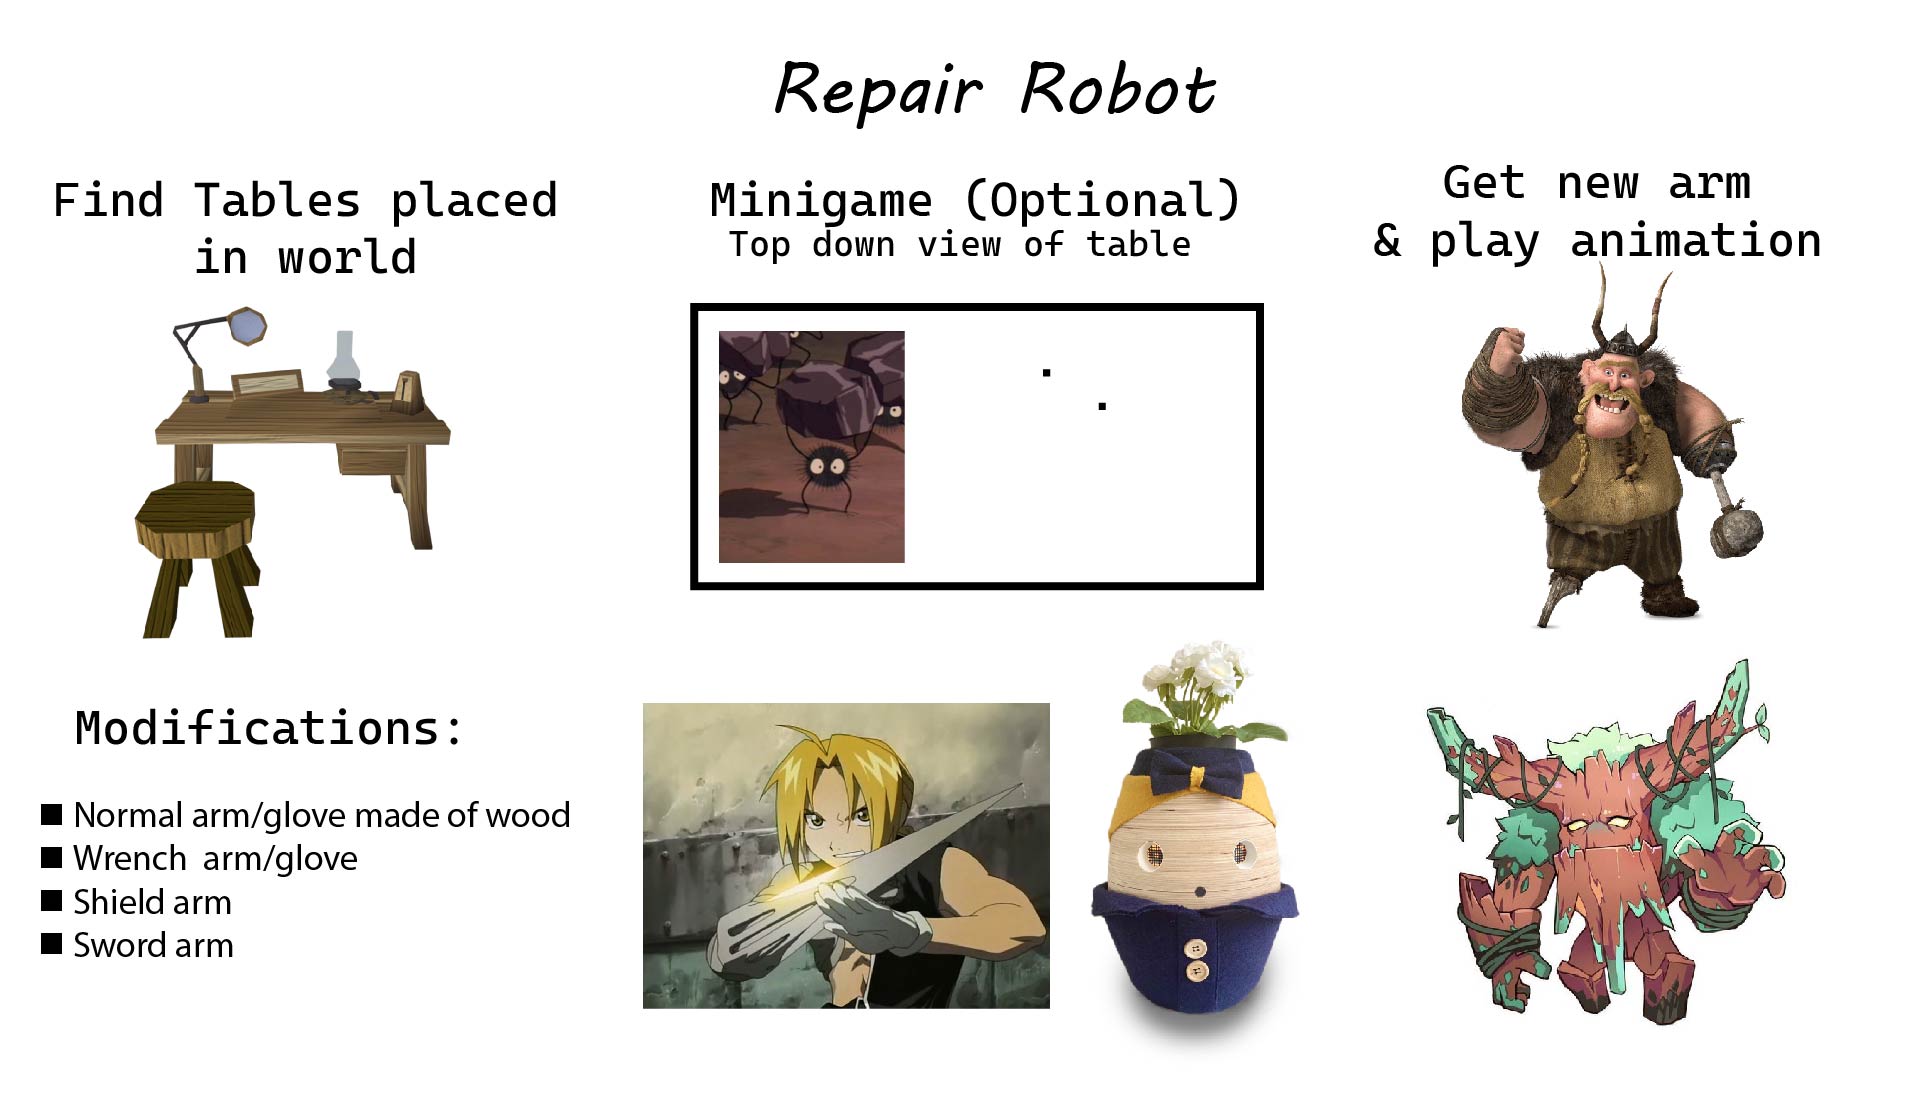 One Page Design Repair Robot